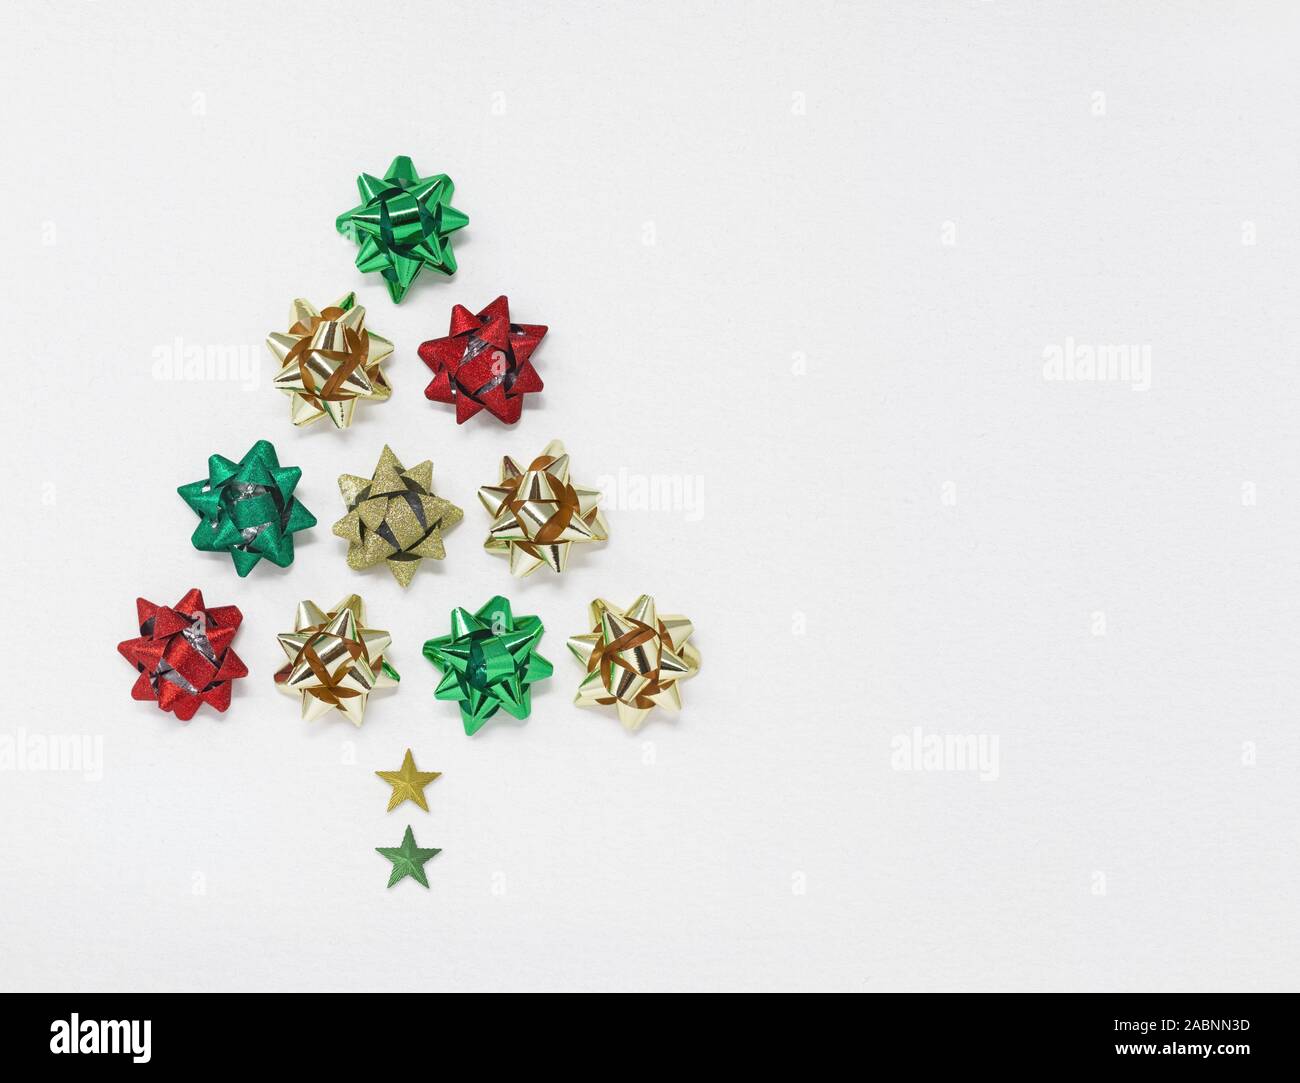 Christmas tree shape made of bows and stars, isolated on a white background with copy space Stock Photo